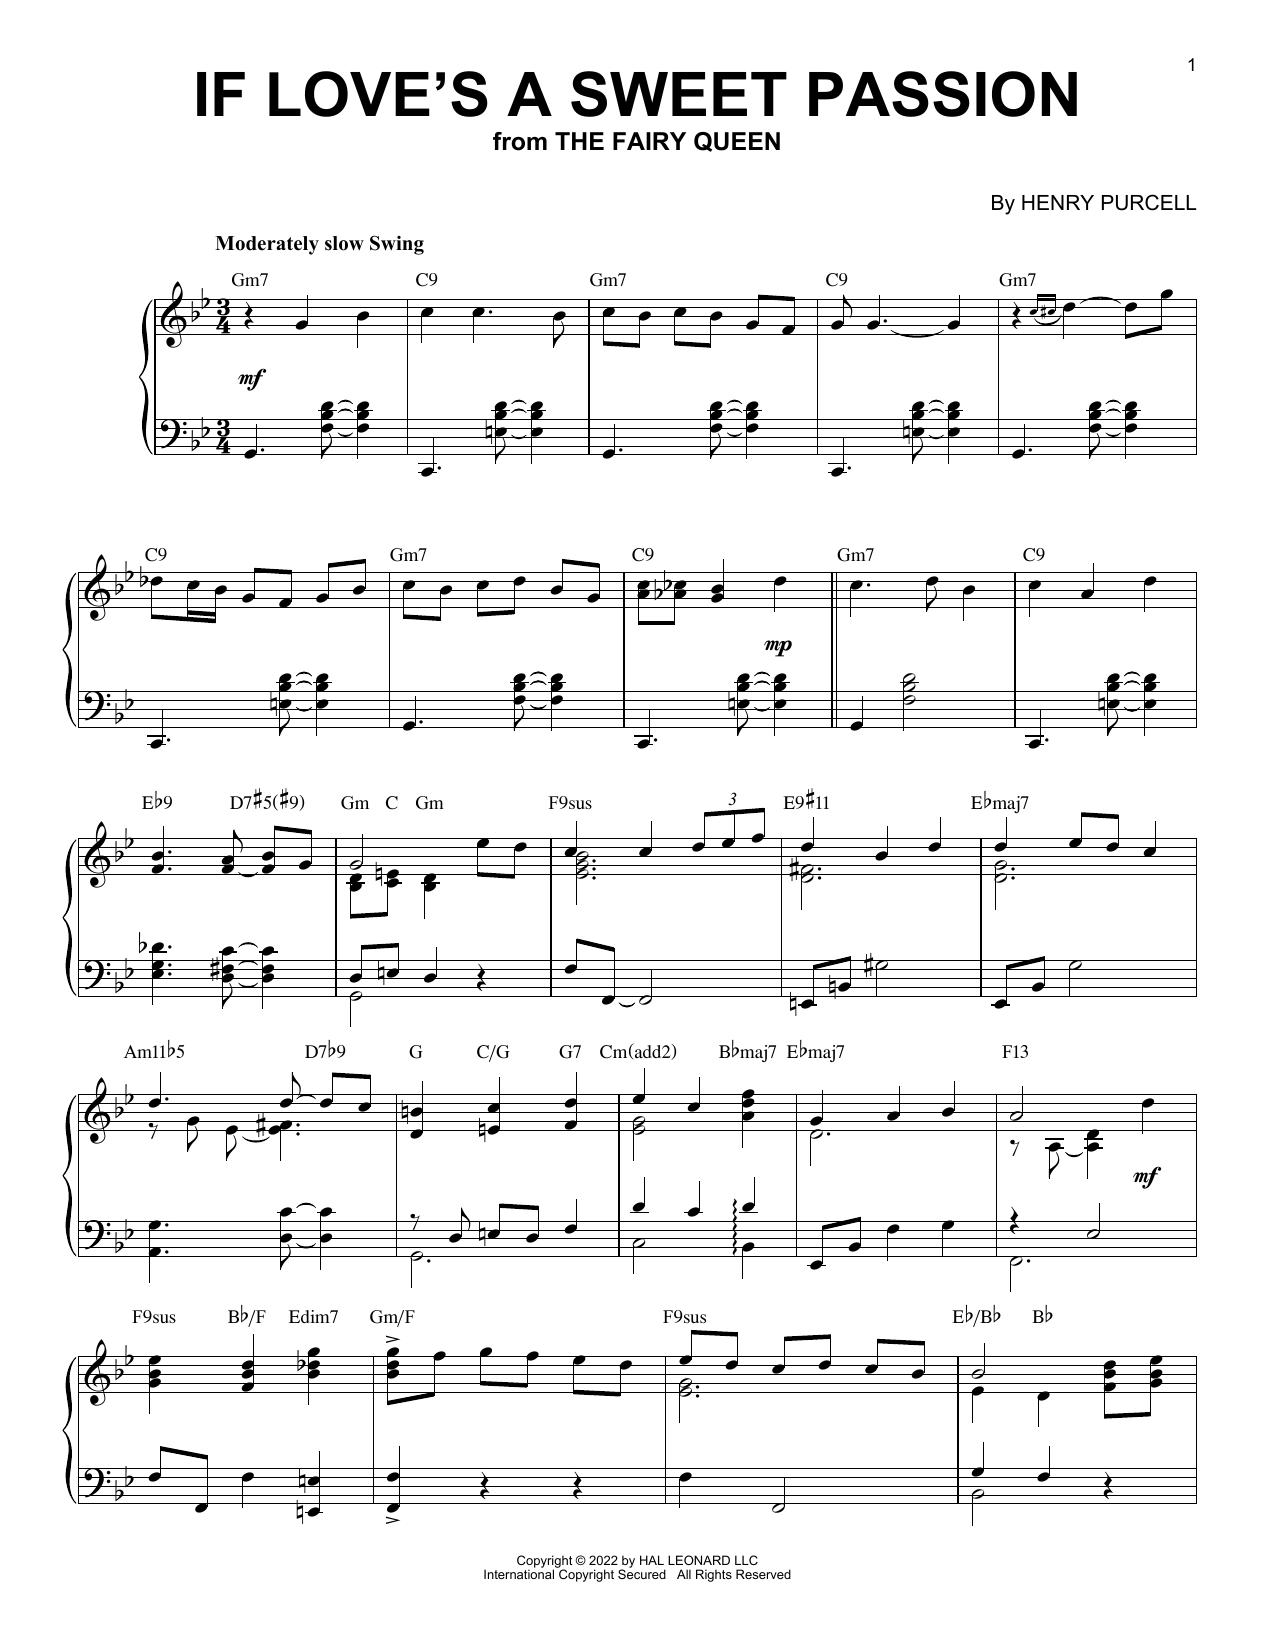 Download Henry Purcell If Love's A Sweet Passion [Jazz version Sheet Music